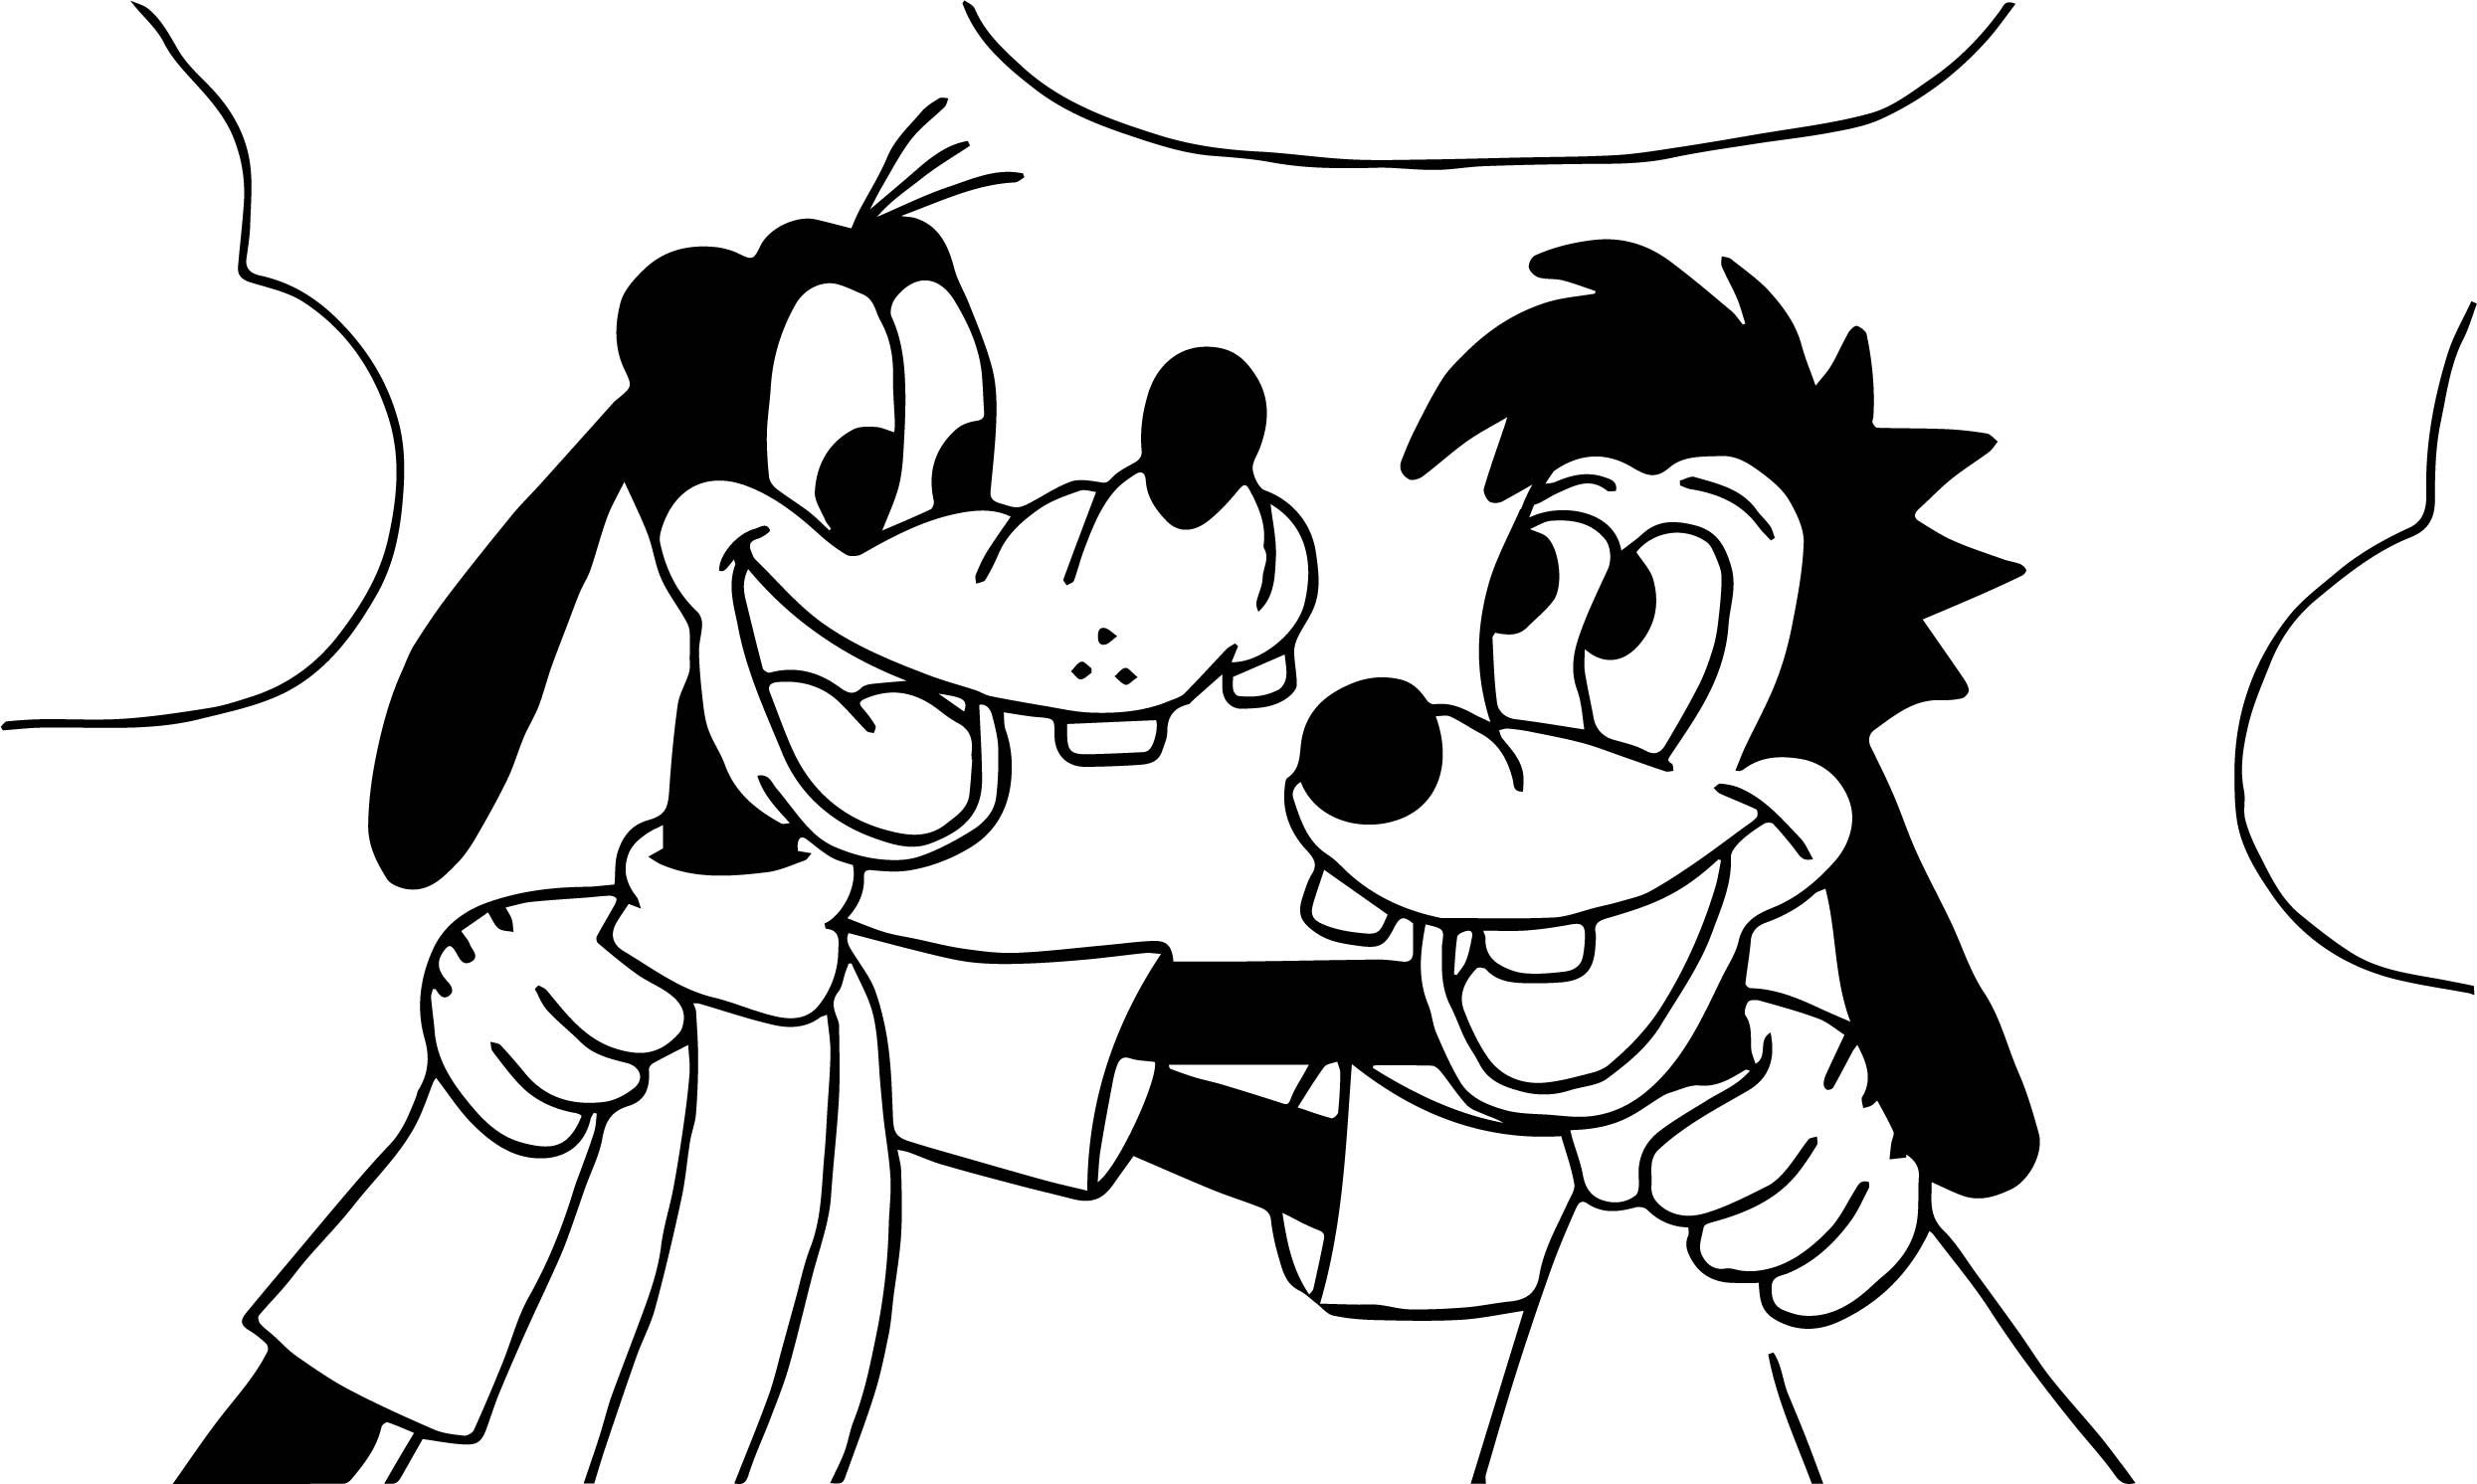 Goofy Coloring Pages For Kids - Goofy And Max Coloring Pages